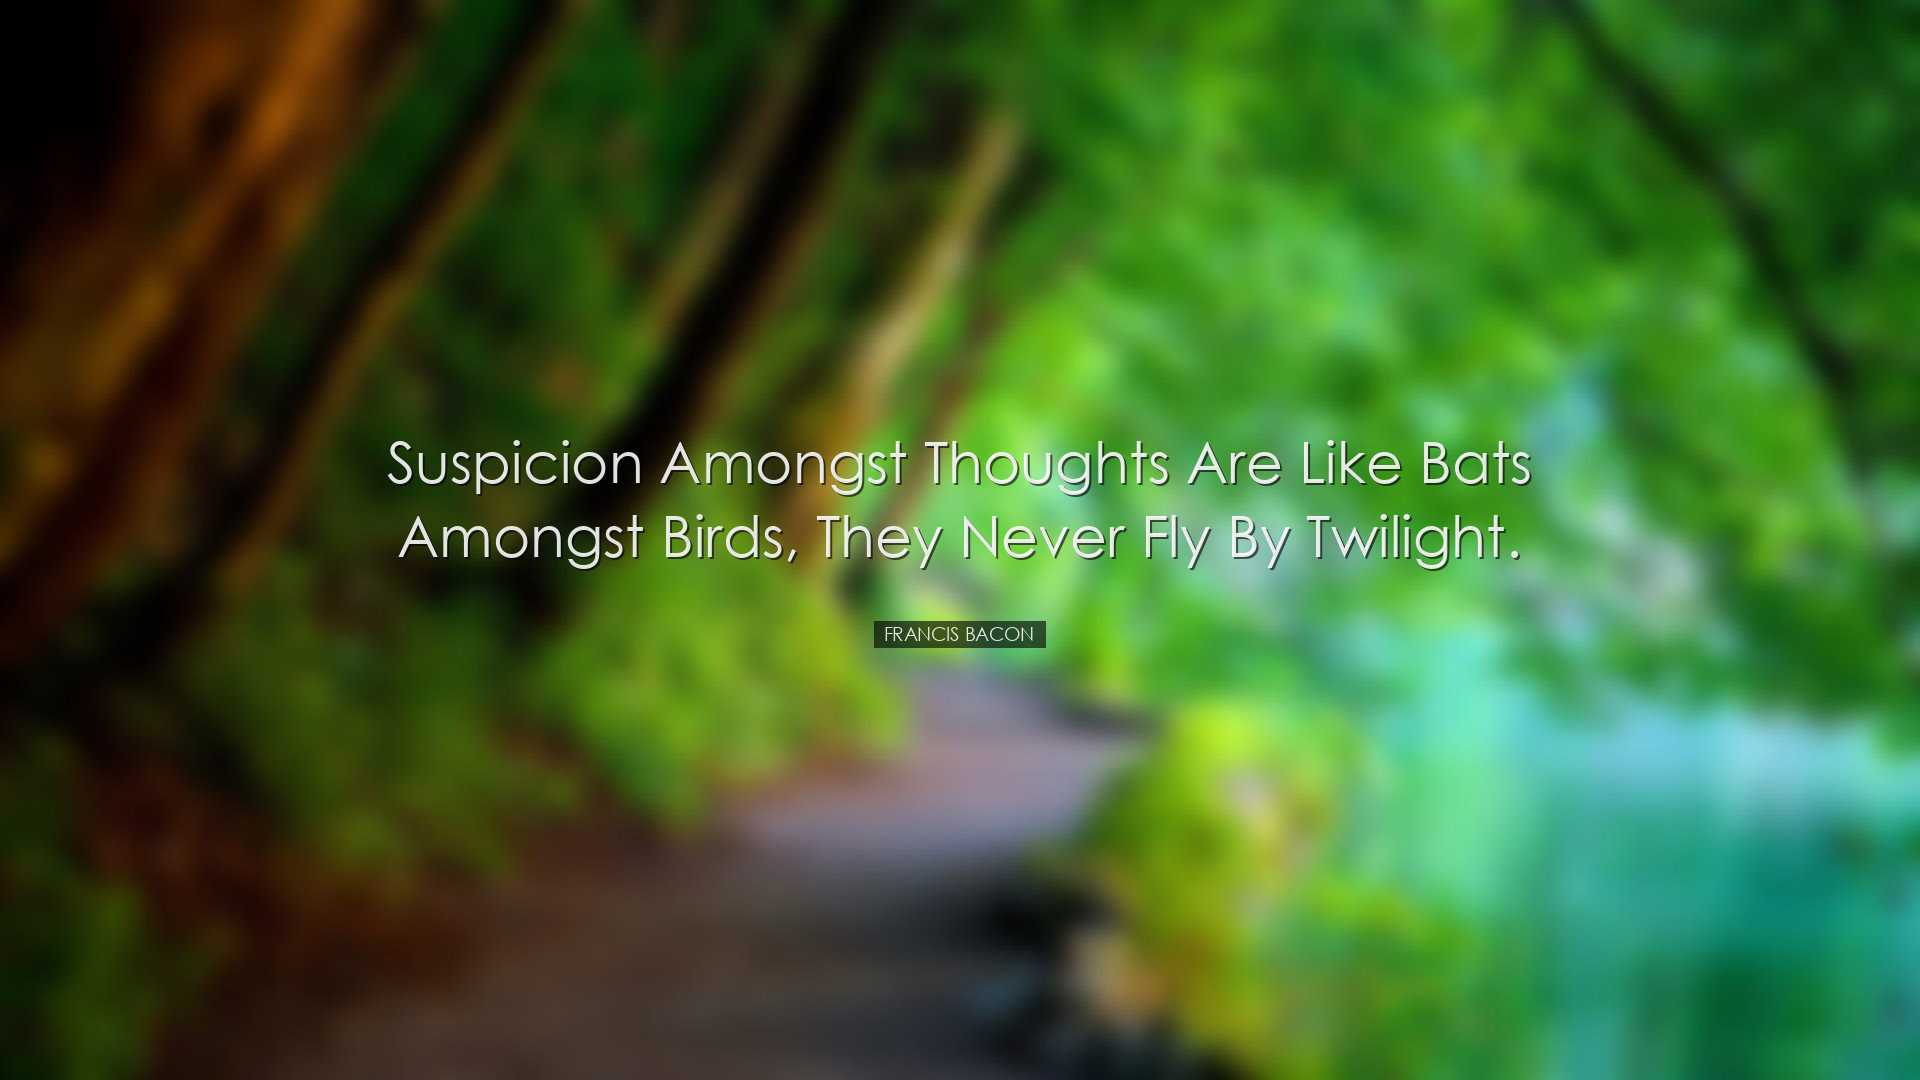 Suspicion amongst thoughts are like bats amongst birds, they never